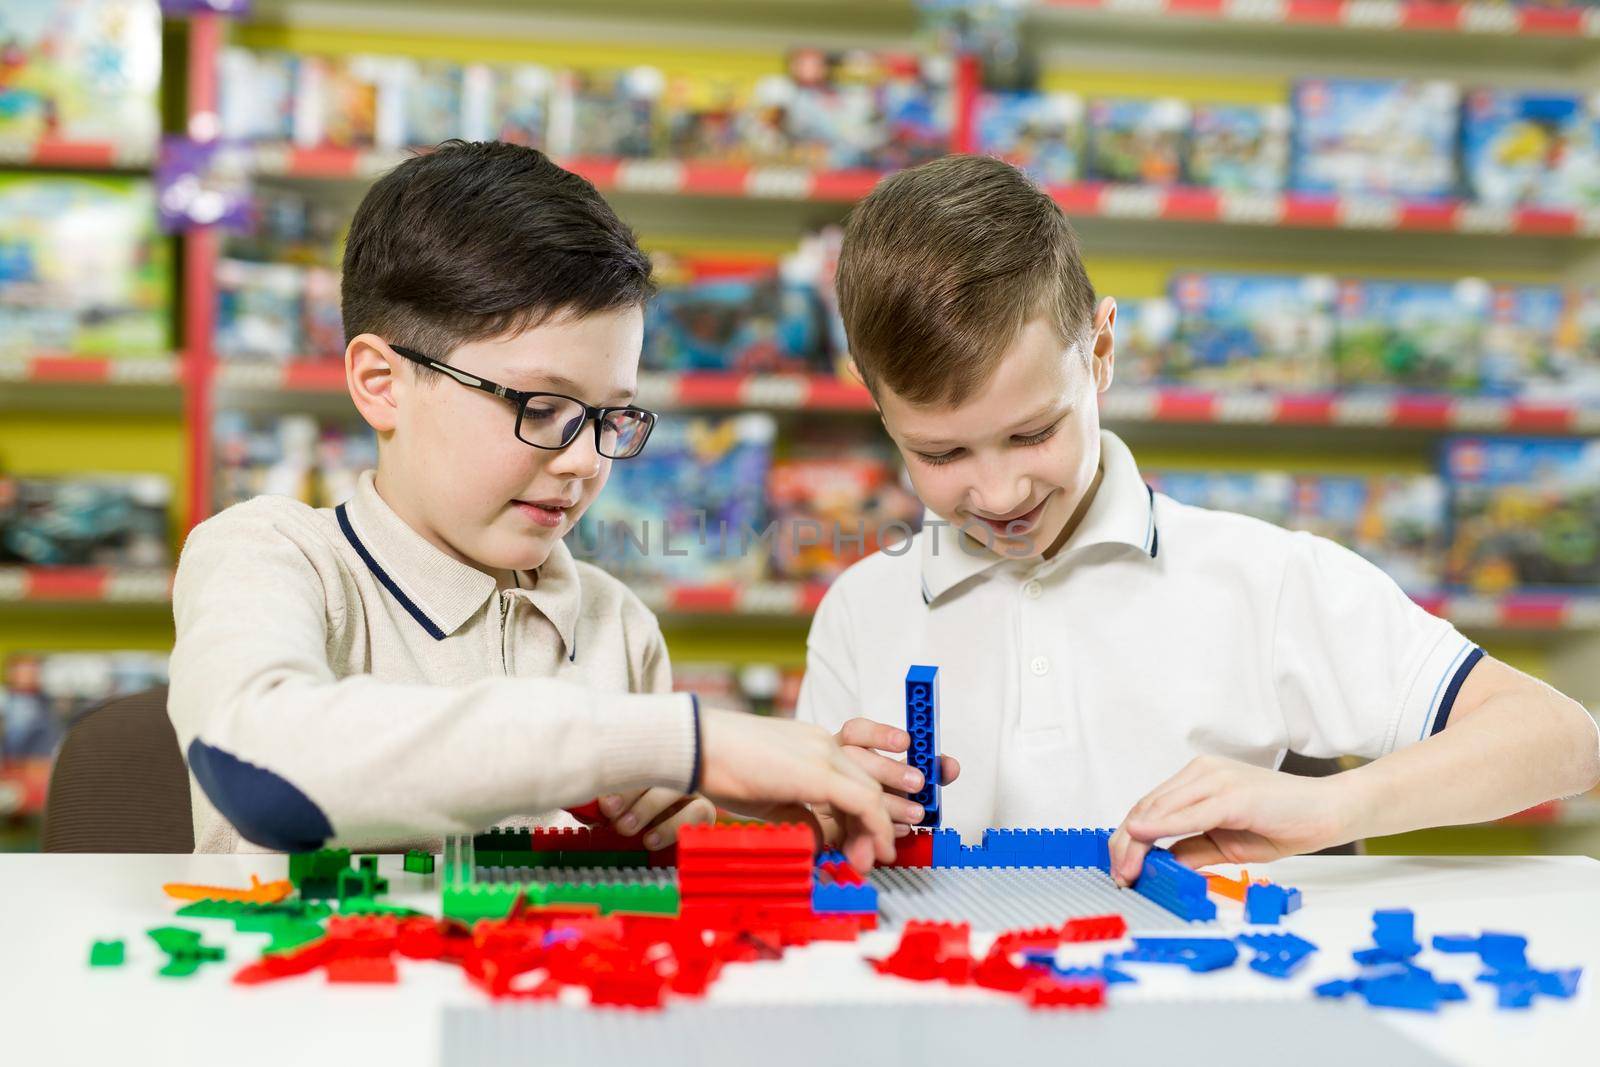 Children play in the designer at the table. Two boys play together with colored plastic blocks in the gaming center, school.